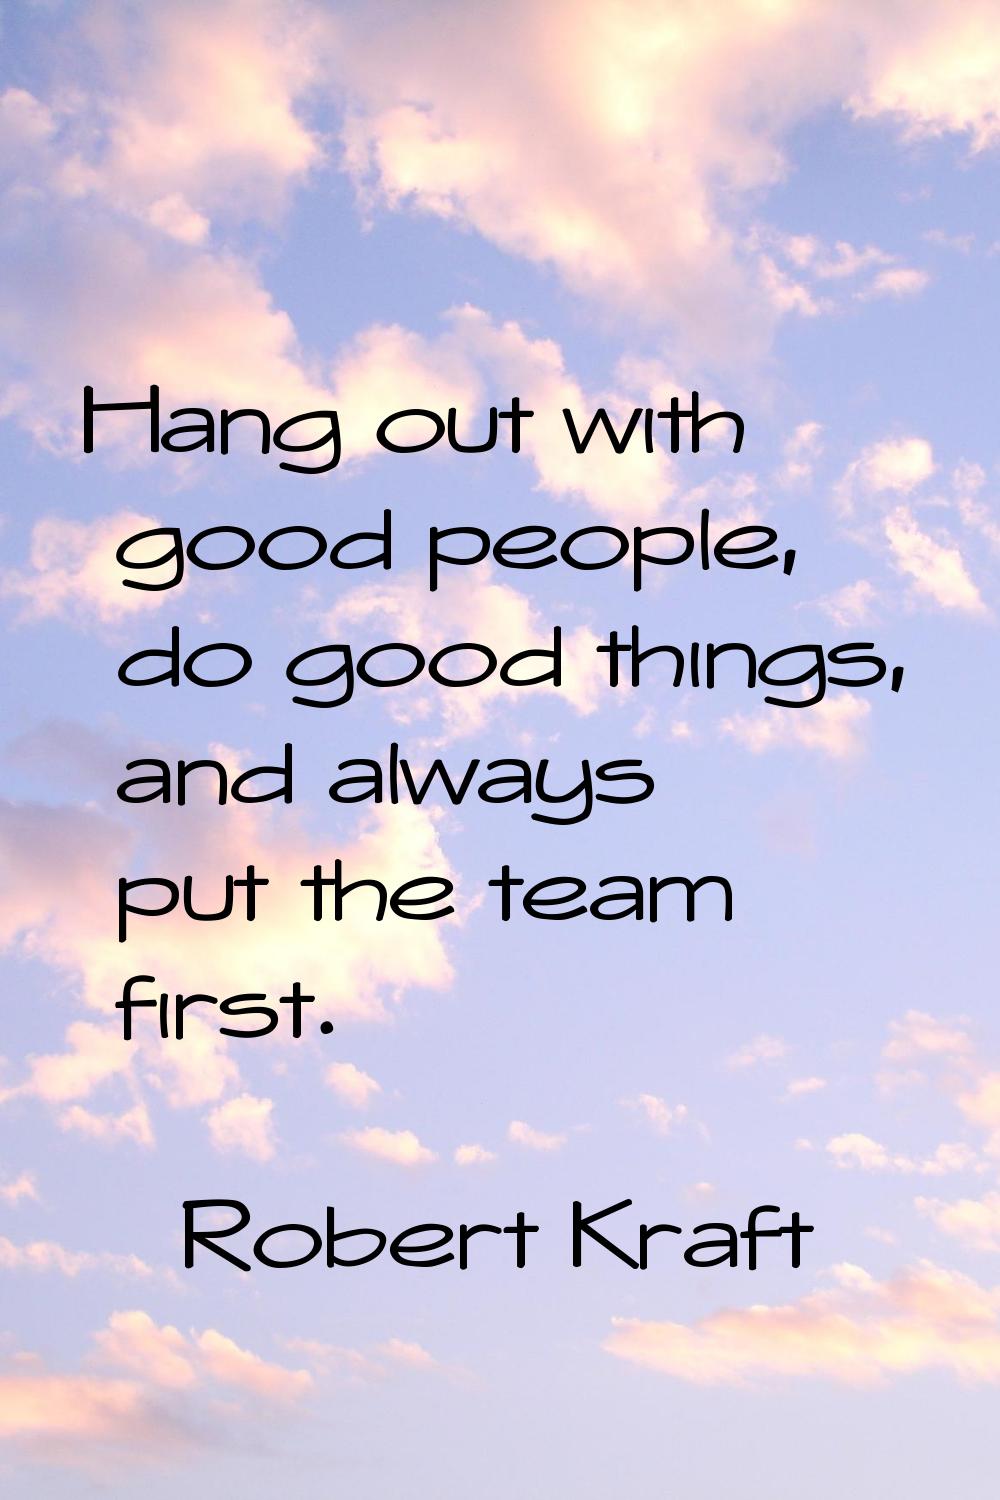 Hang out with good people, do good things, and always put the team first.